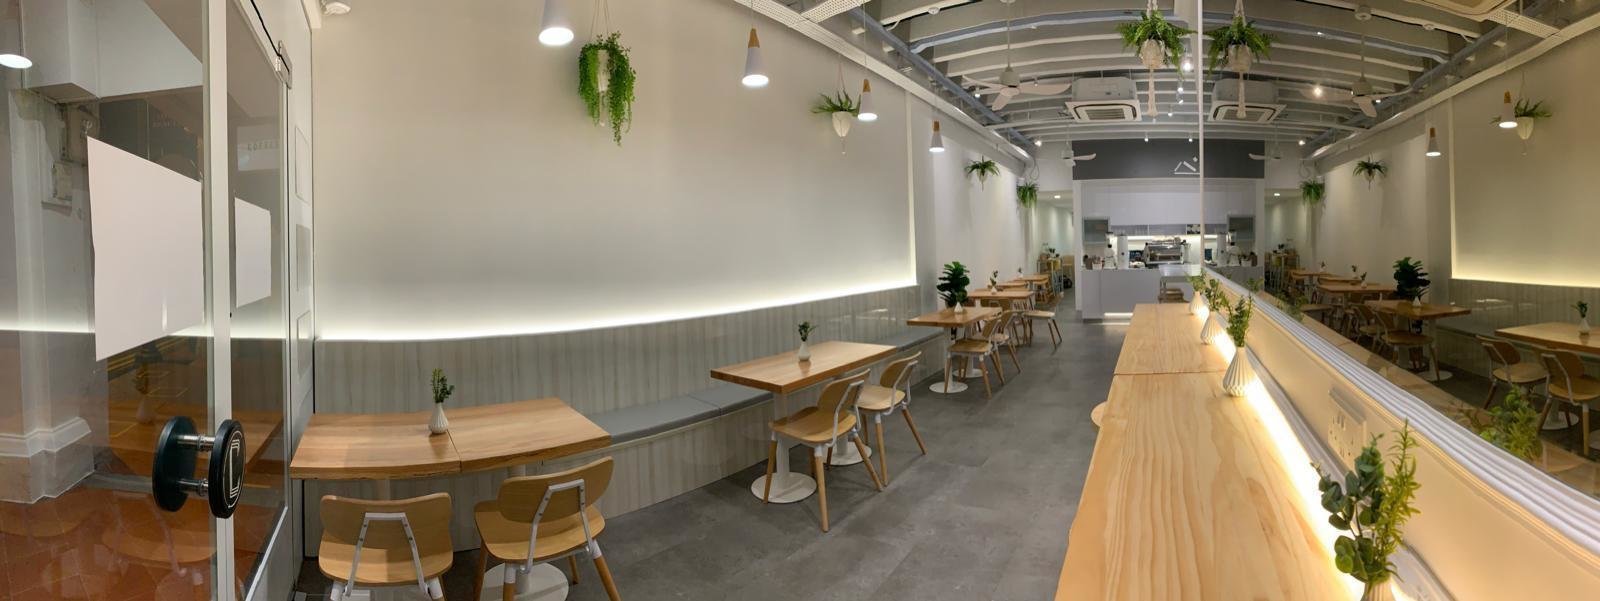 <span class="translation_missing" title="translation missing: en.meta.location_title, location_name: C Cafe, city: Singapore">Location Title</span>